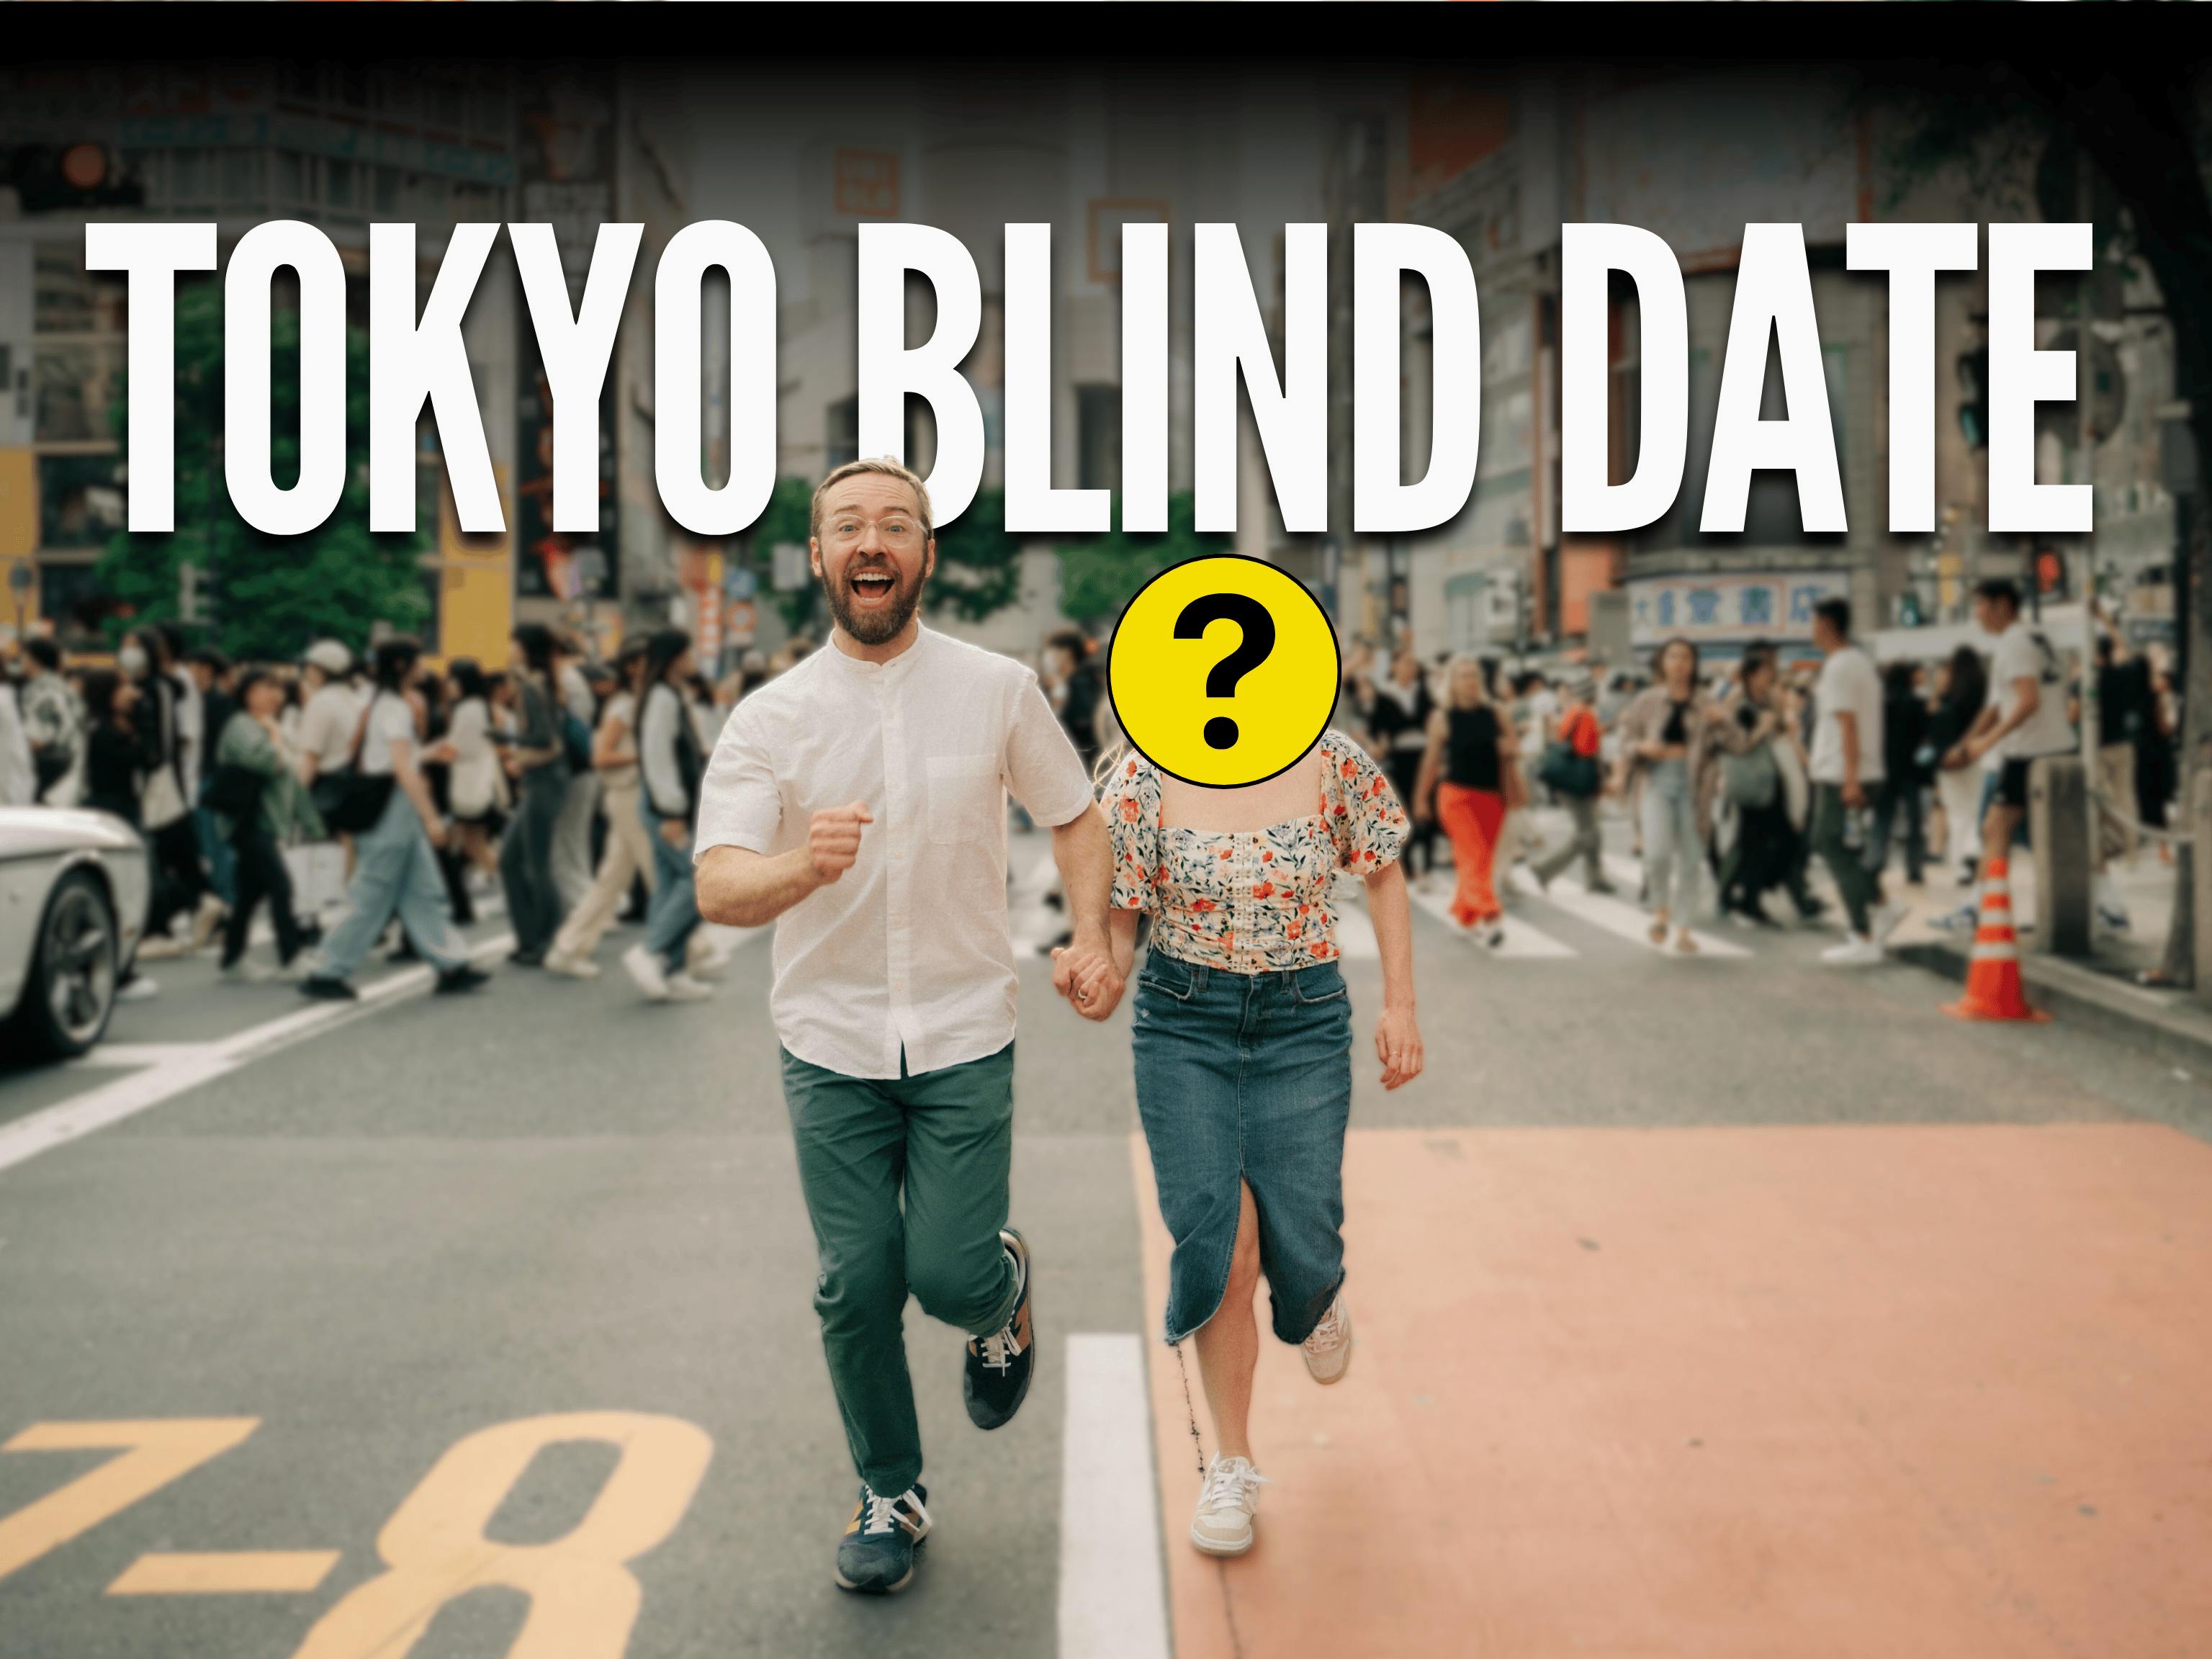 Header text: Tokyo Blind Date, with background photo of Nick and his date walking in Tokyo